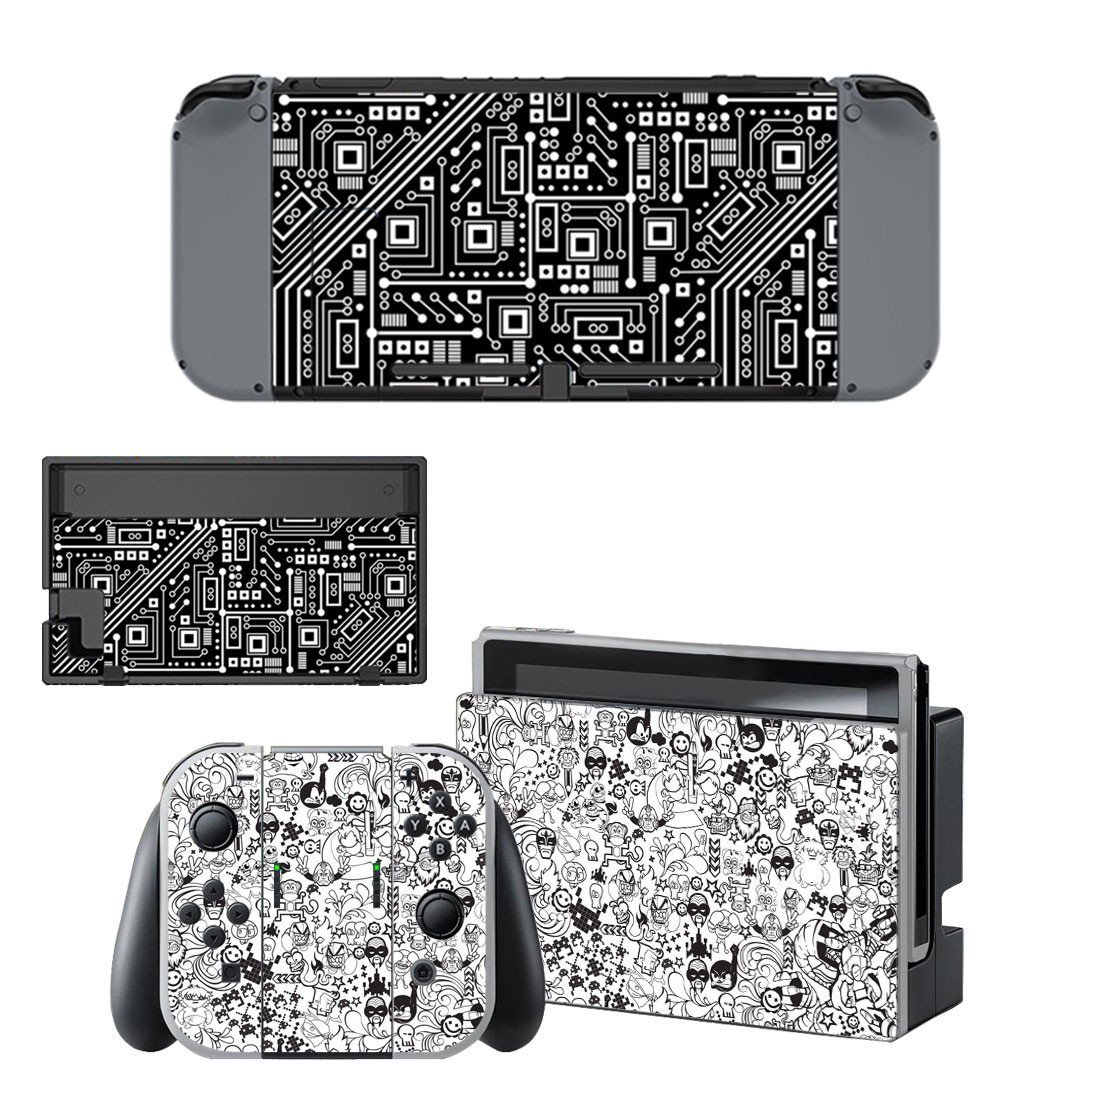 Pcb Board Skin Sticker Decal For Nintendo Switch Consoleskins Co